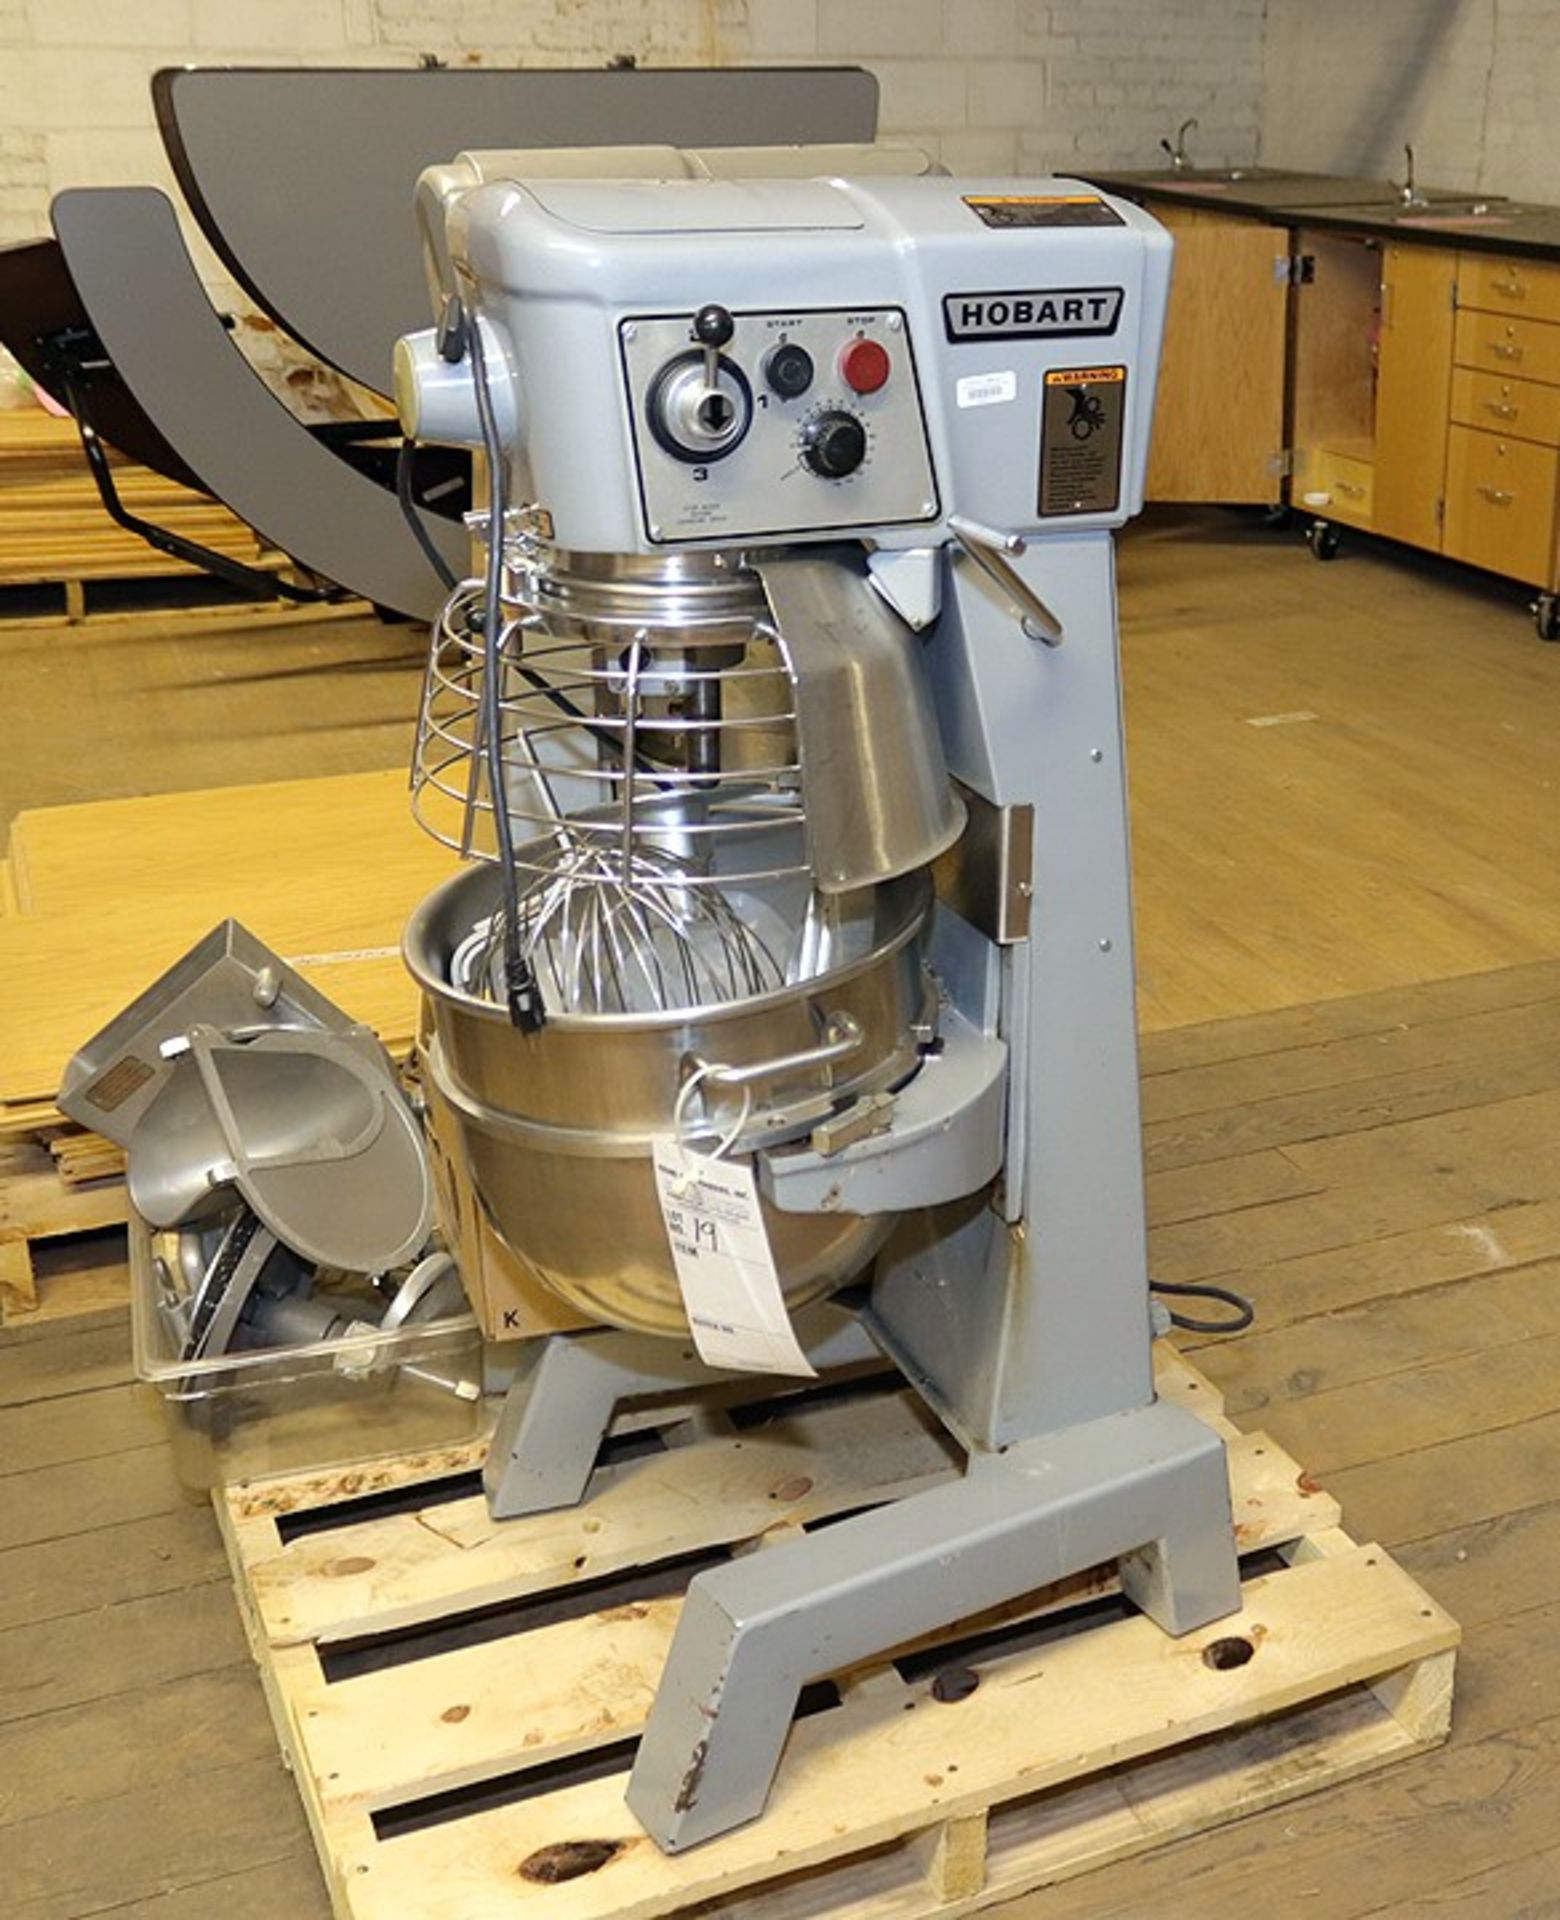 Hobart Commercial Mixer Model D3001 with bowl and attachments